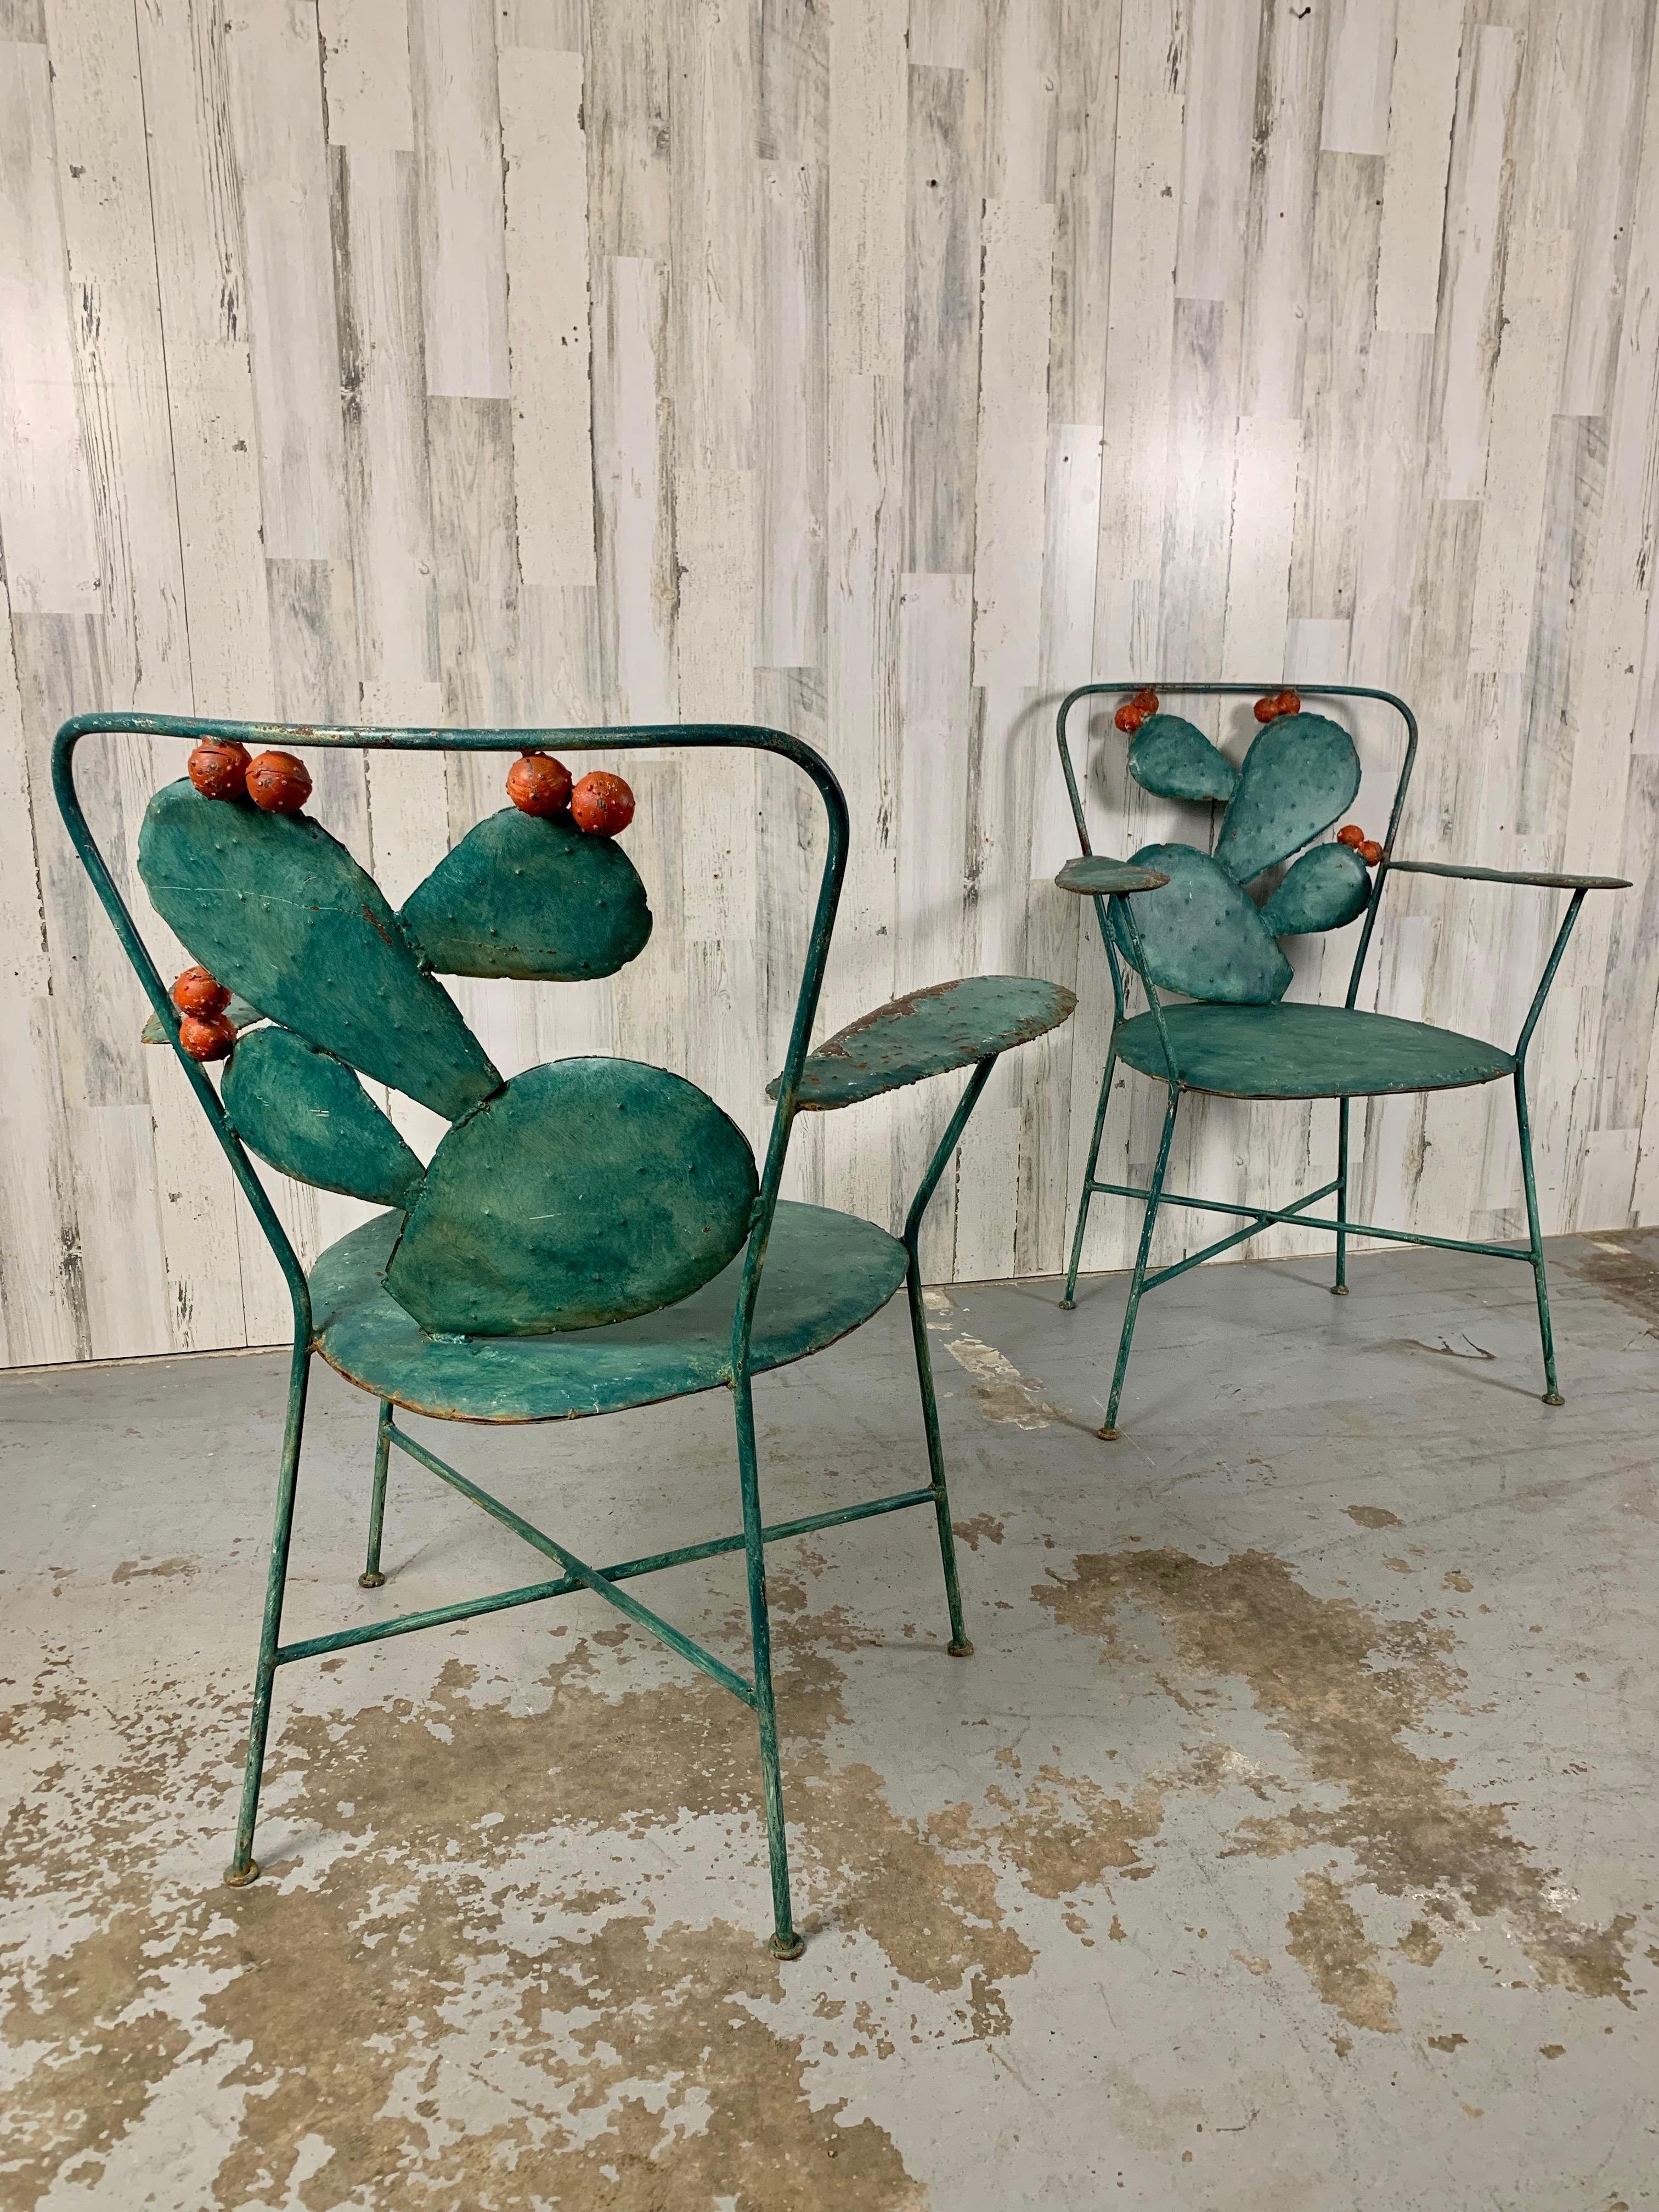 20th Century Prickly Pear Garden Chairs